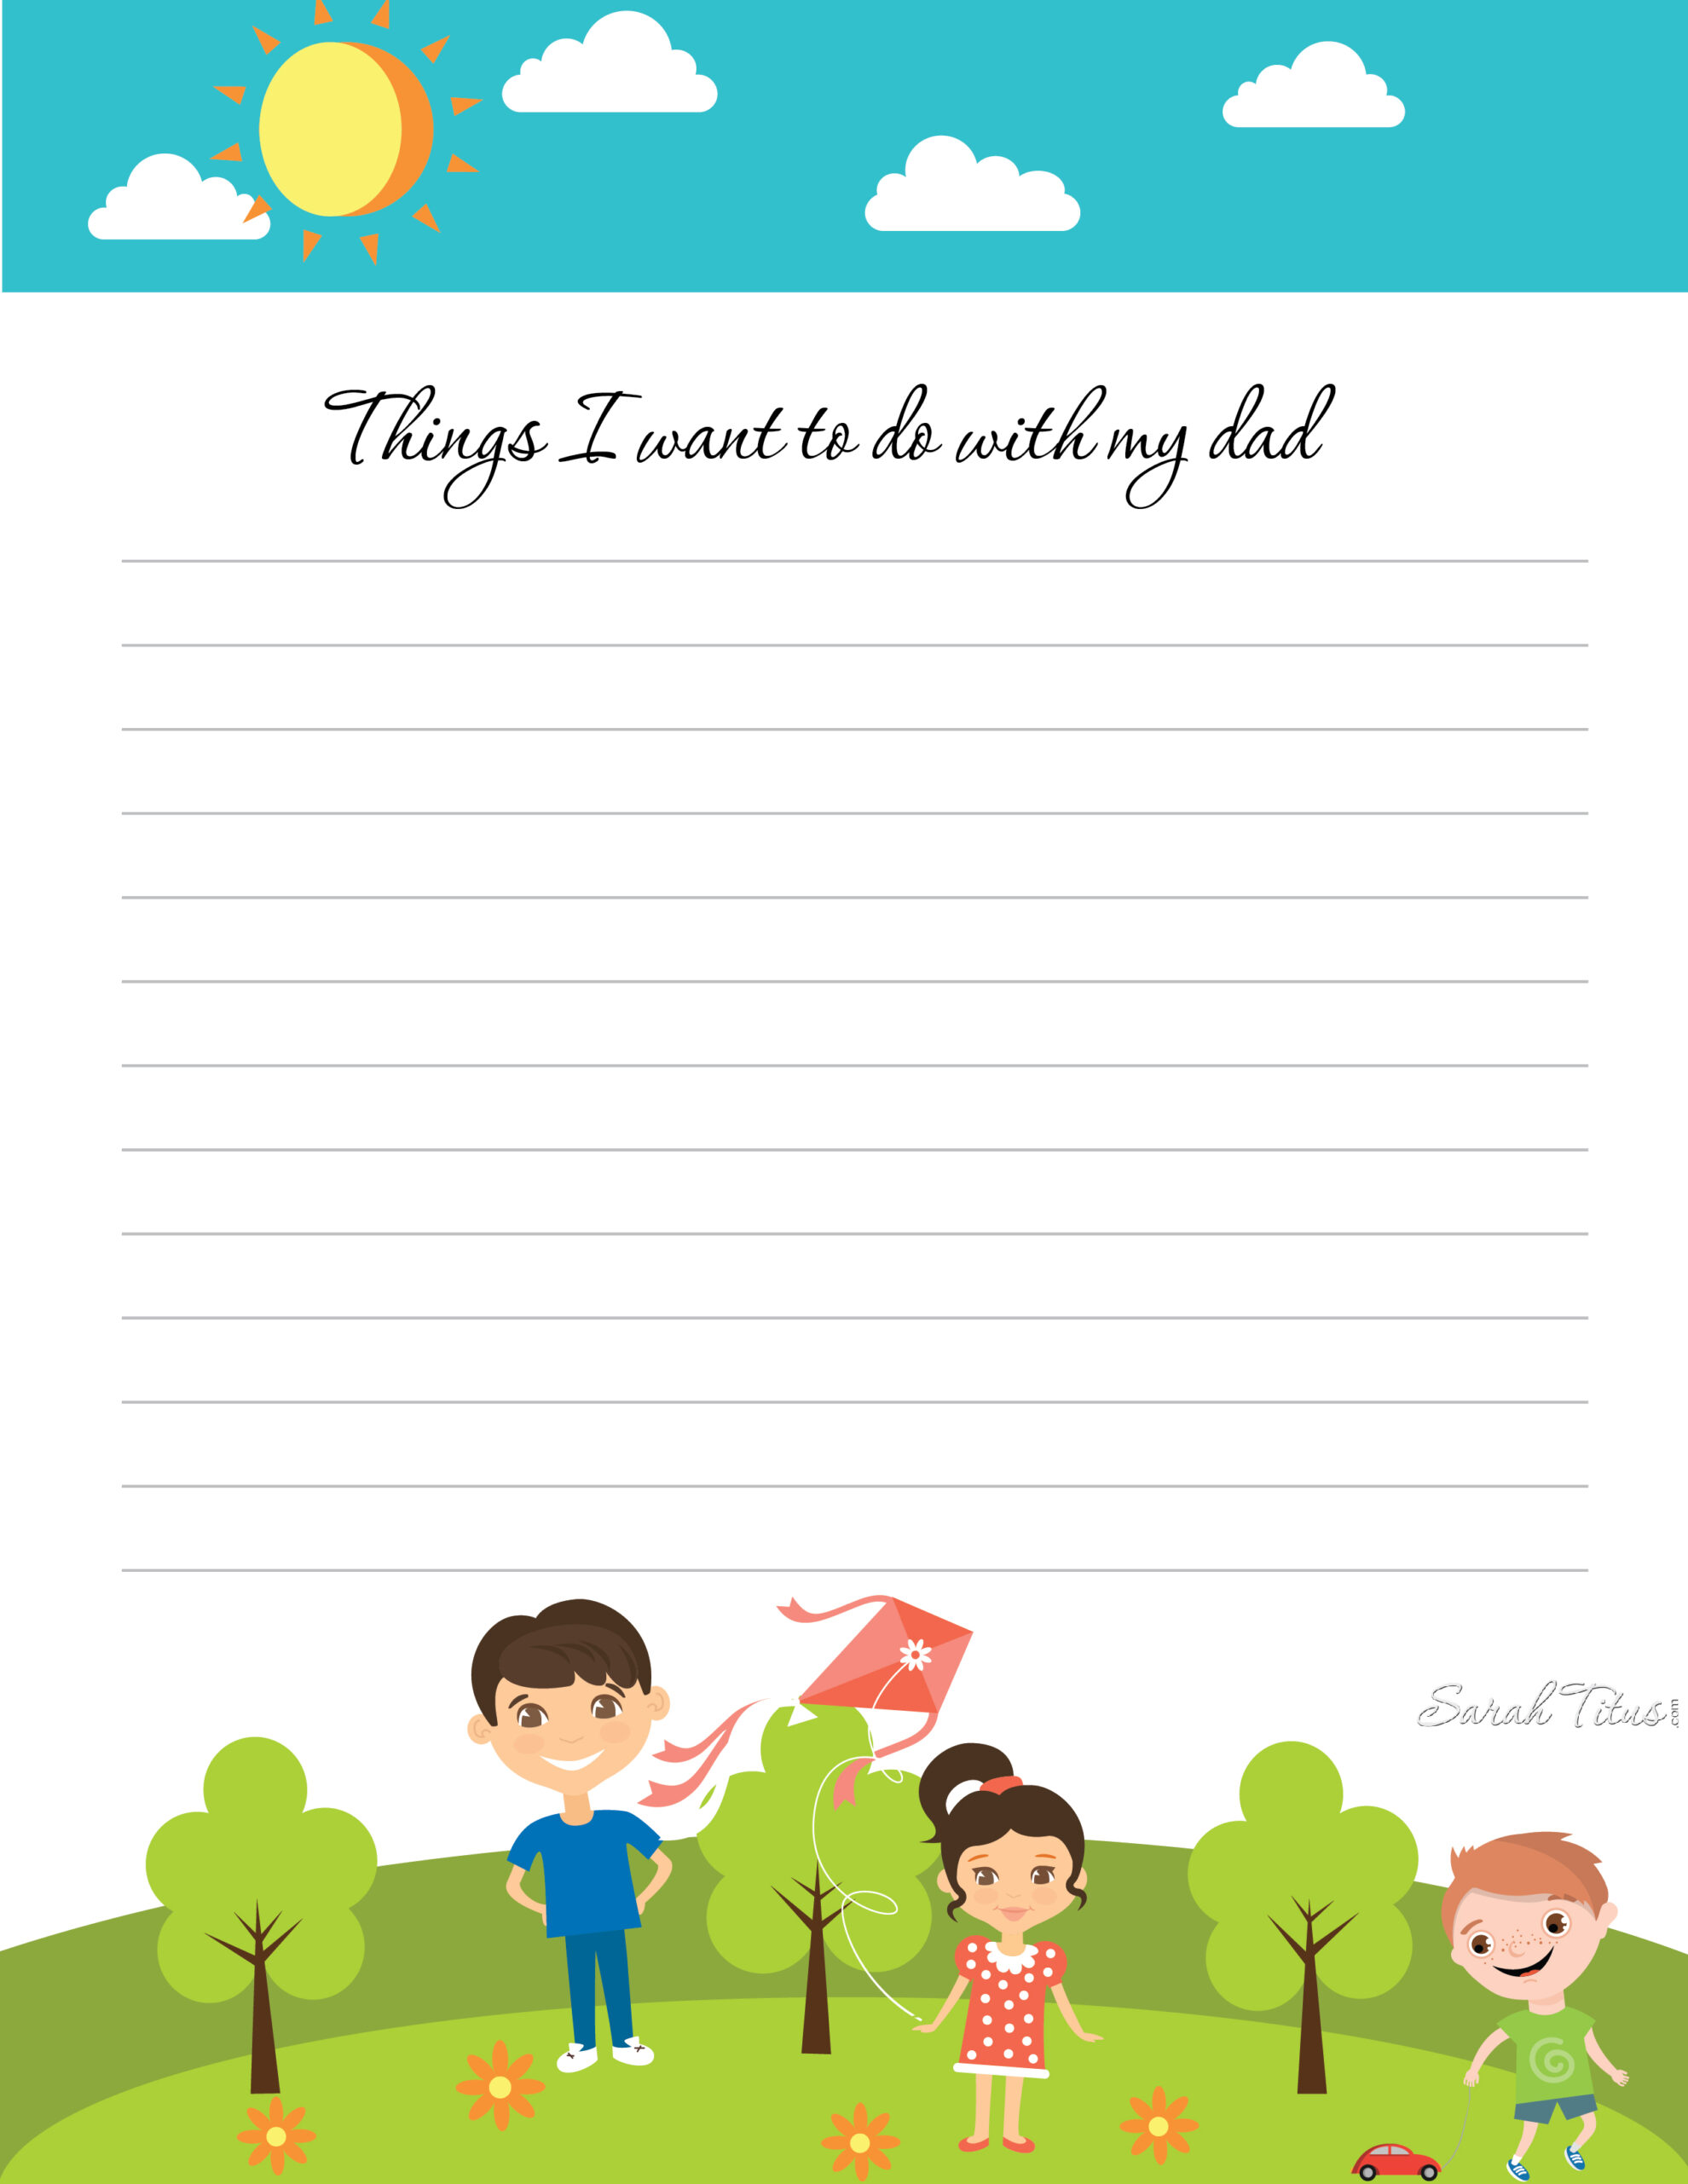 If you're looking for a special gift this Father's Day, you don't have to go out and spend a ton of money...all you need is a gift from the heart. This Father's Day Journal free printables set is perfect!